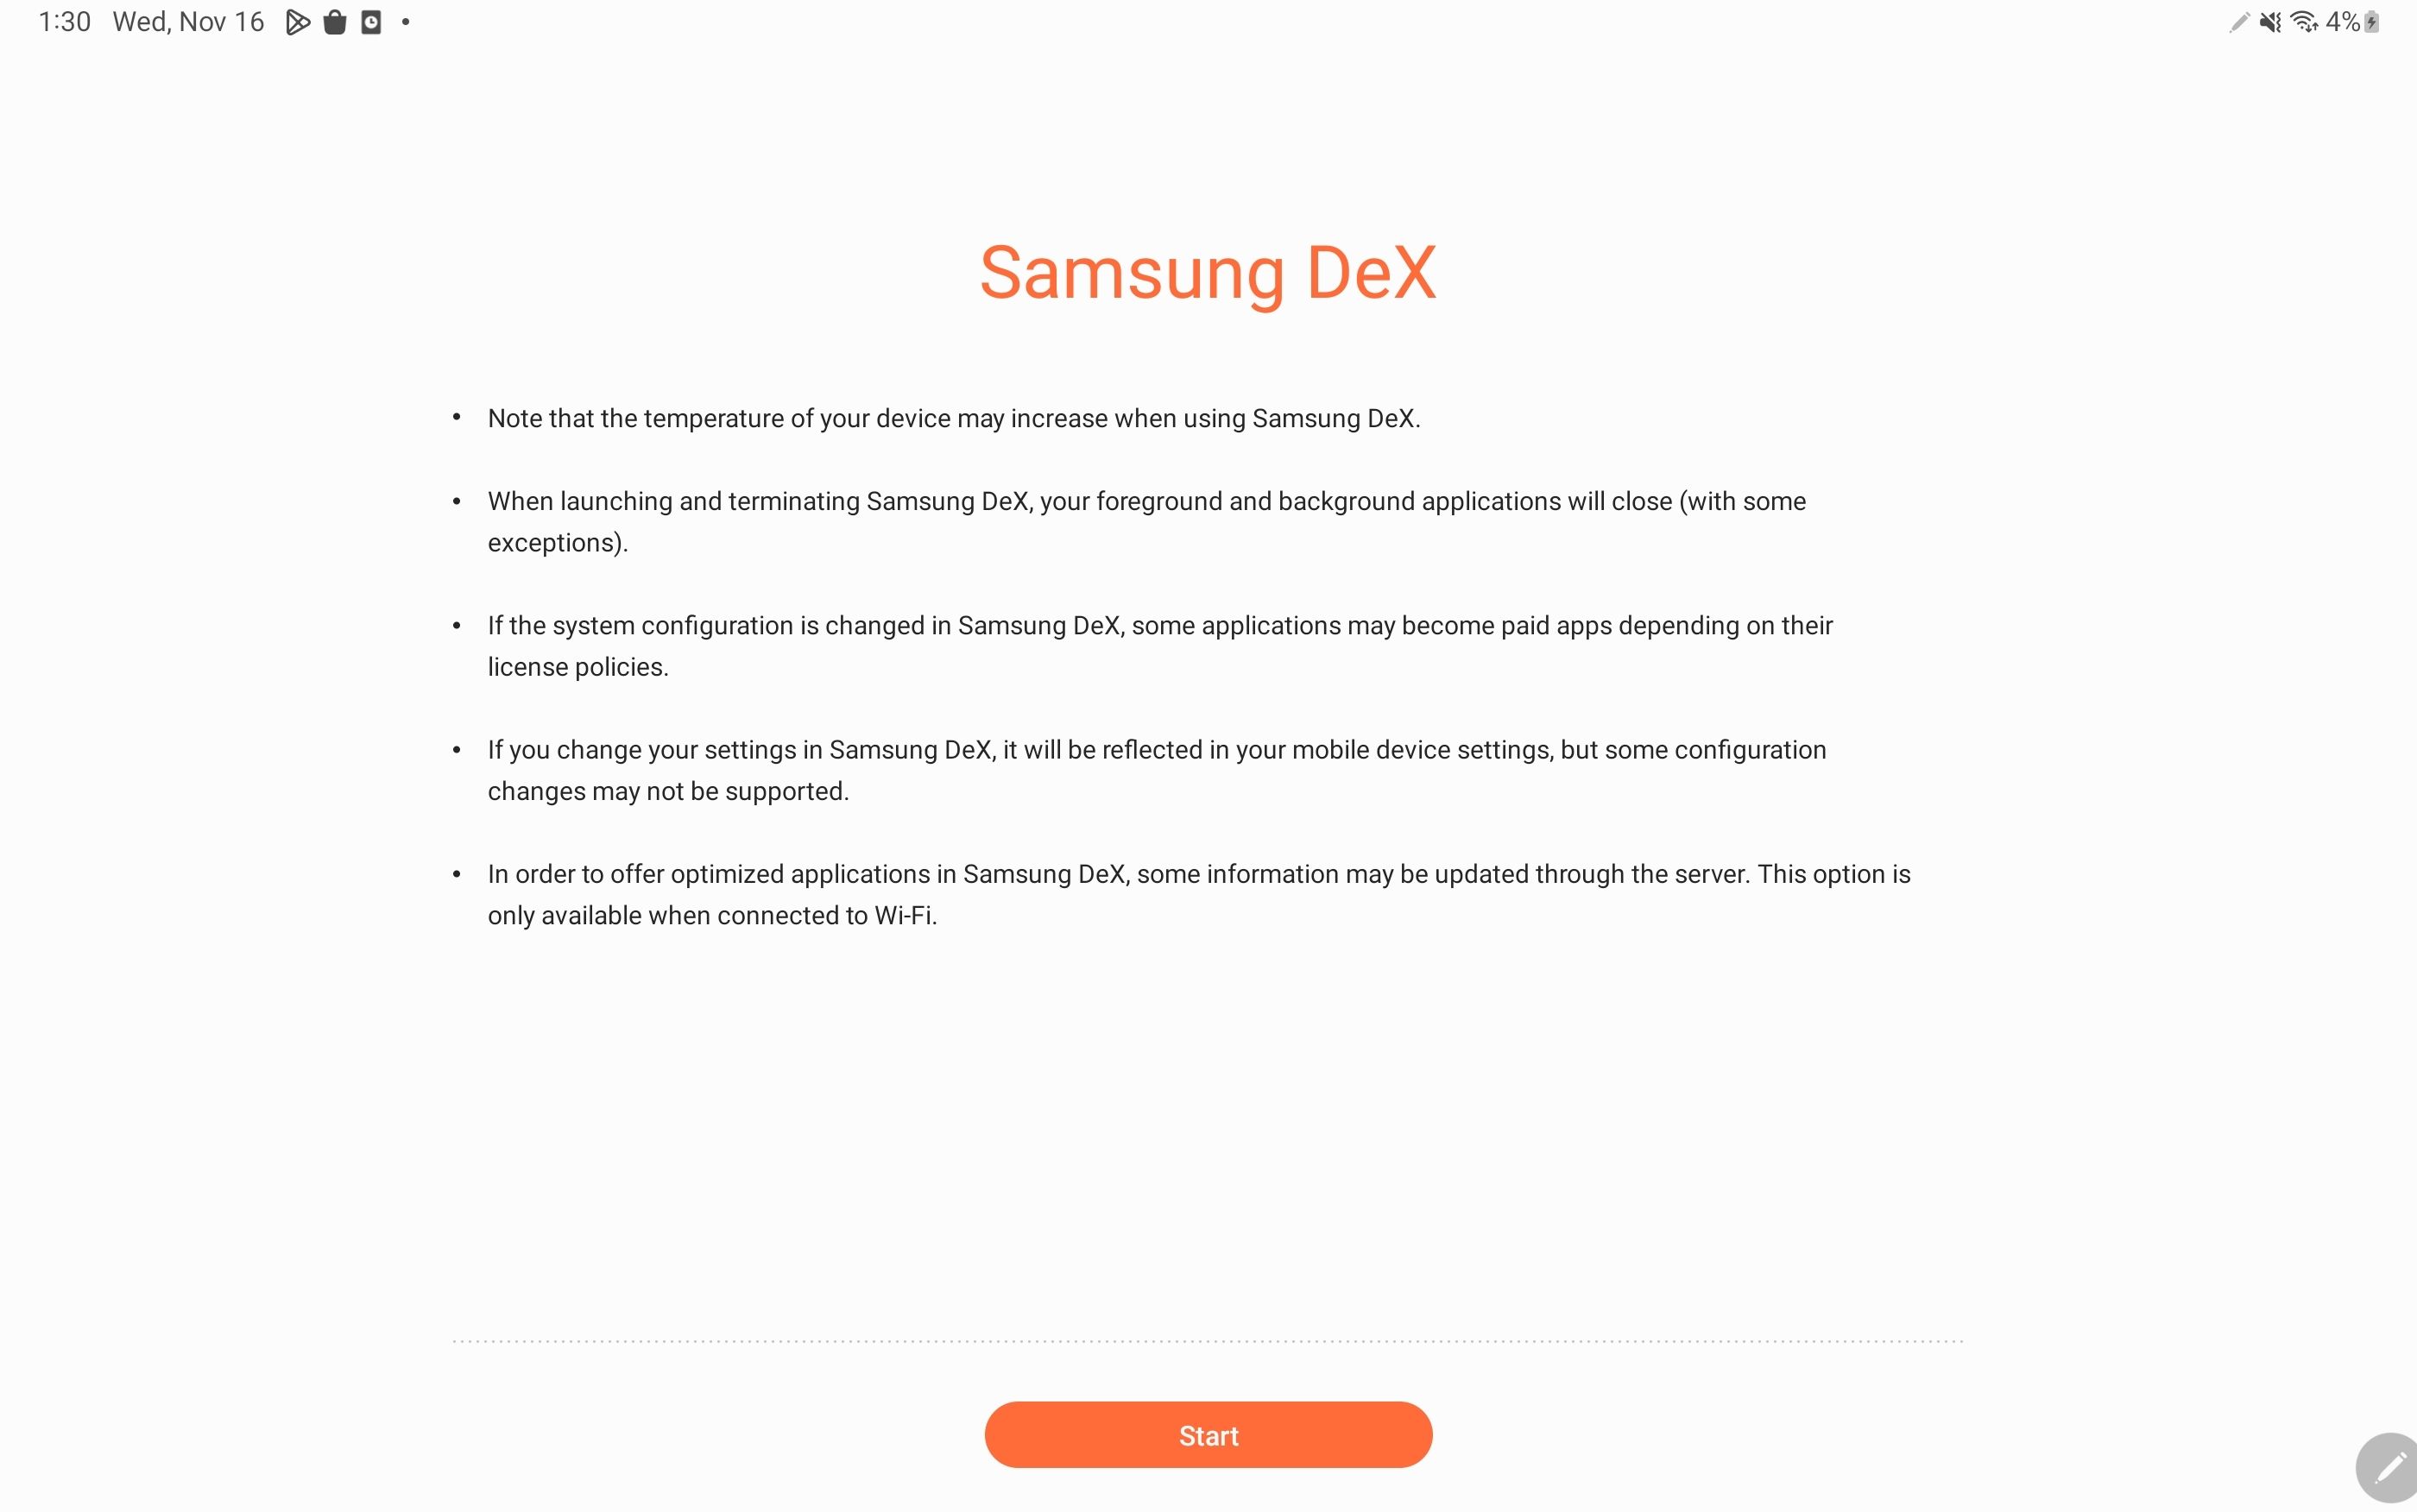 Hit start after reading over the Samsung DeX disclaimer on your tablet.